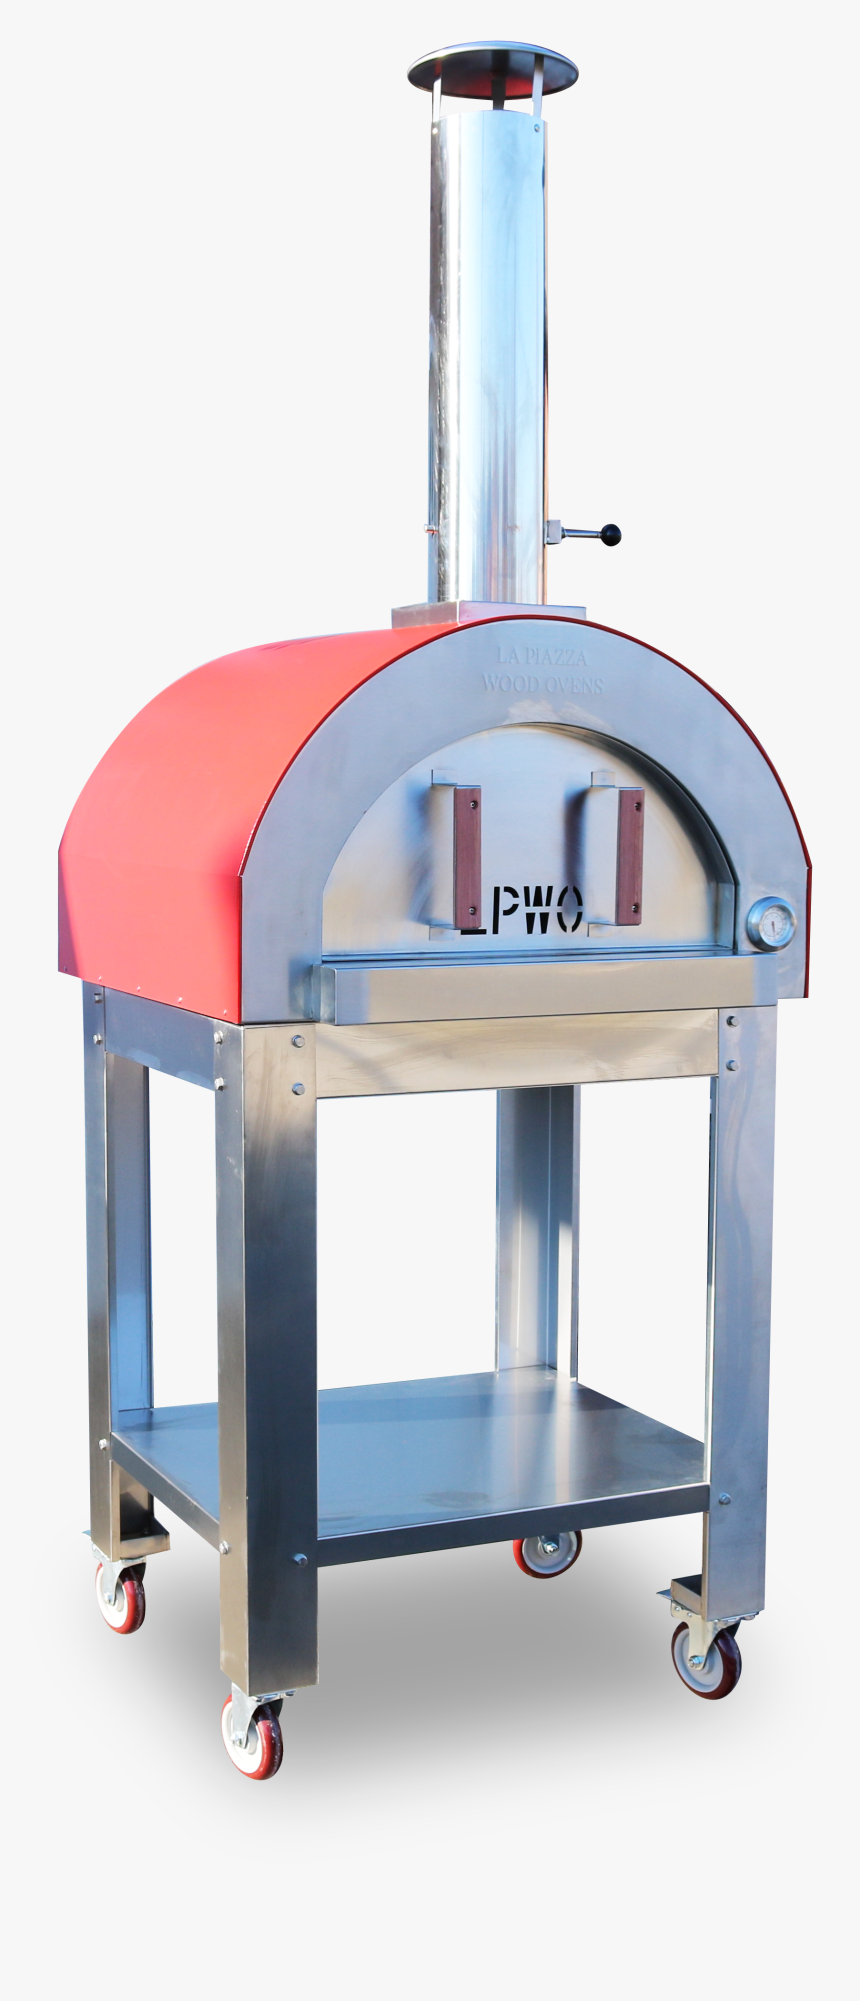 Piccolo Outdoor Wood Oven - La Piazza Wood Oven, HD Png Download, Free Download